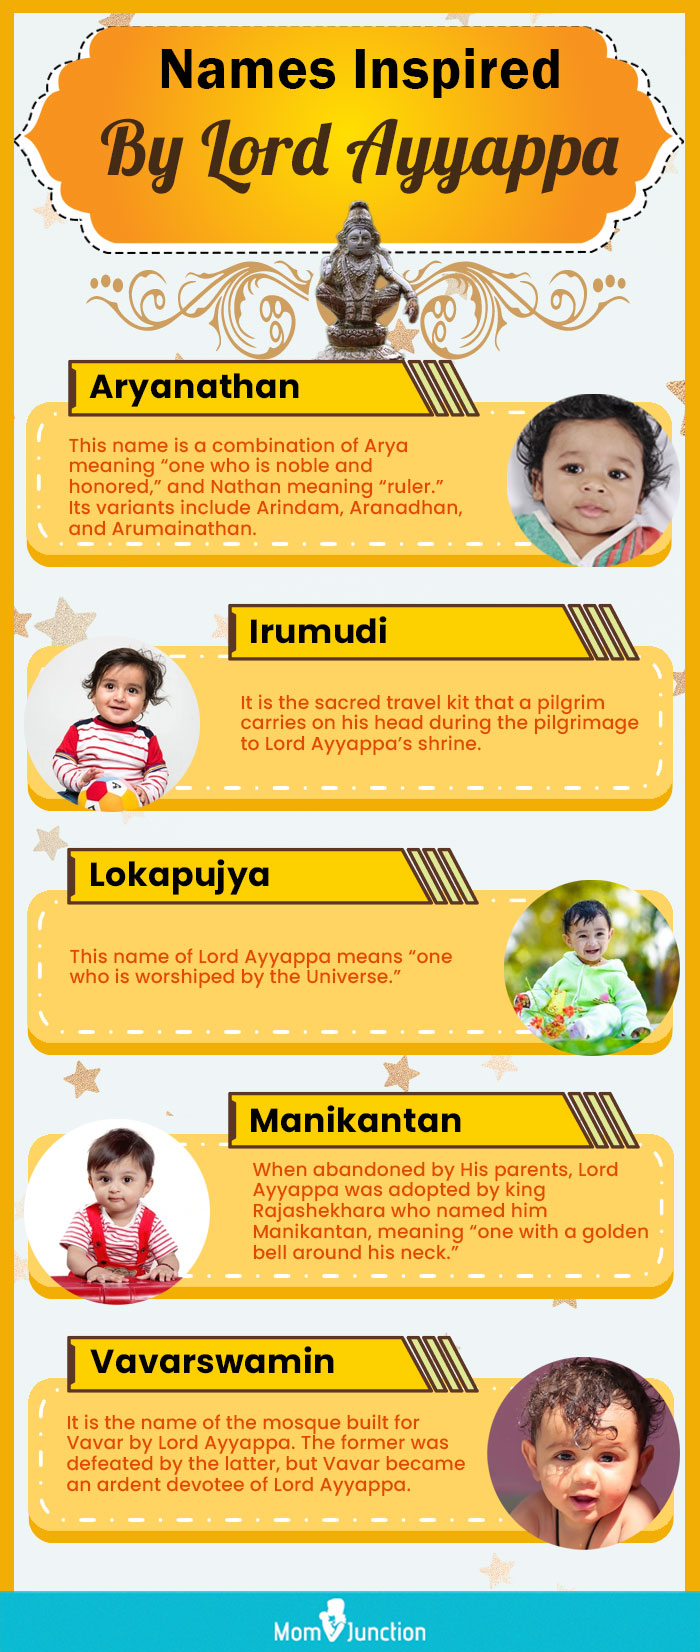 names inspired by lord ayyappa (infographic)